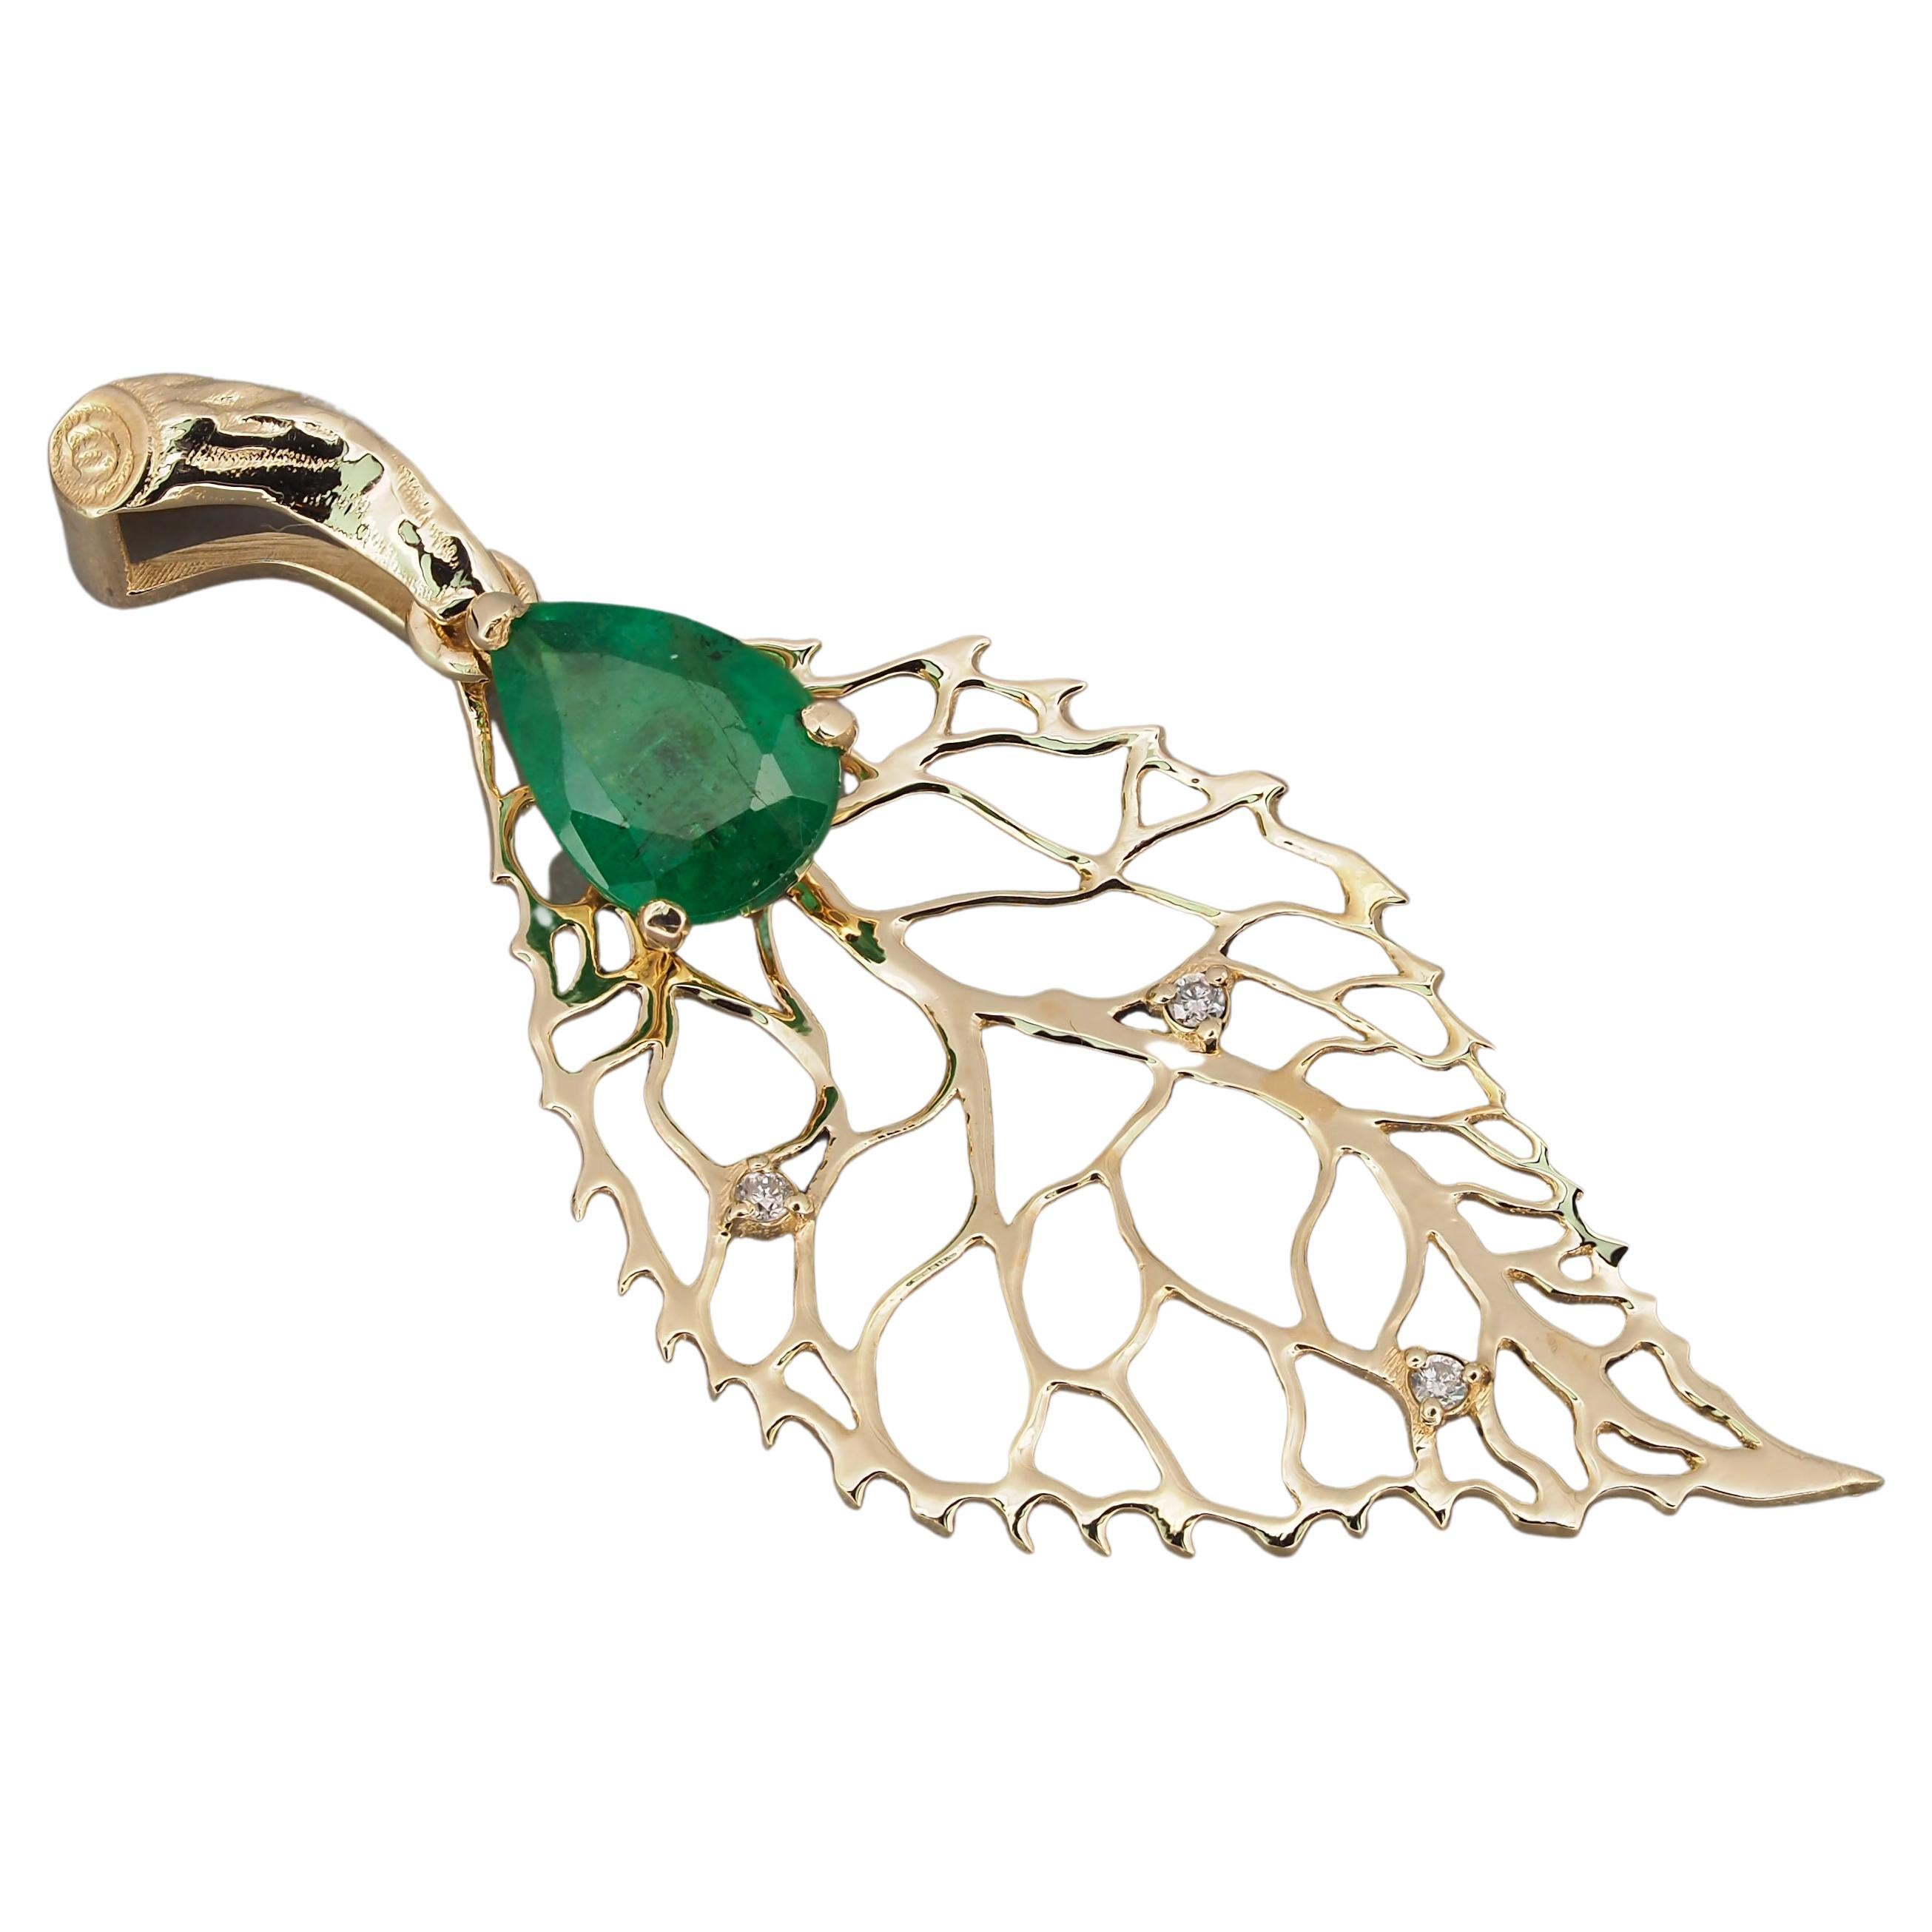 14k Gold "Leaf"Pendant with Natural Emerald and Diamonds